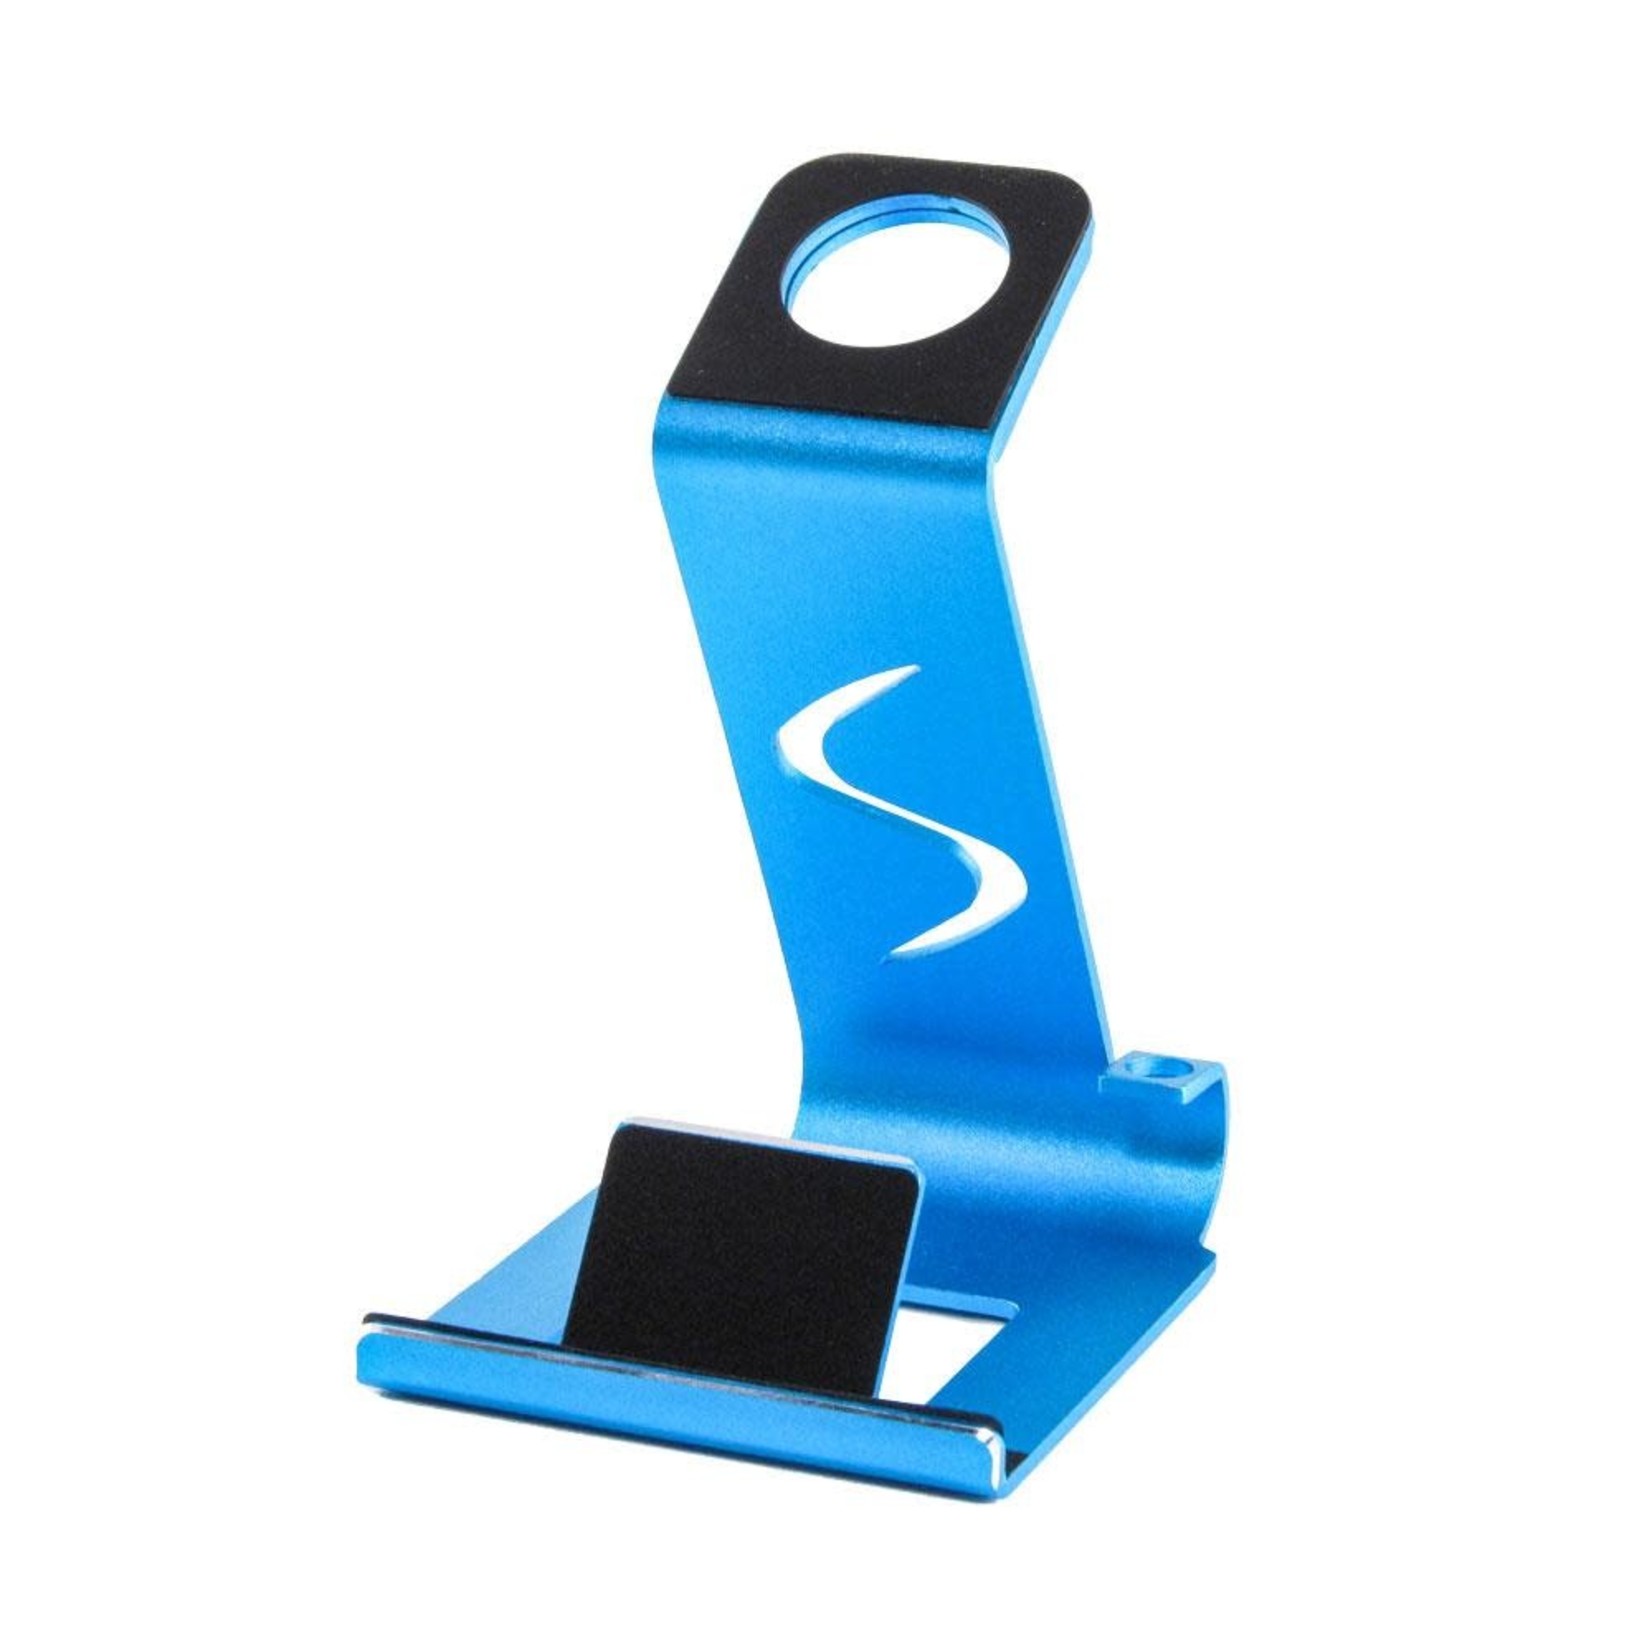 VECTR | 2 in 1 Charging Stand for Apple Watch and iPhone